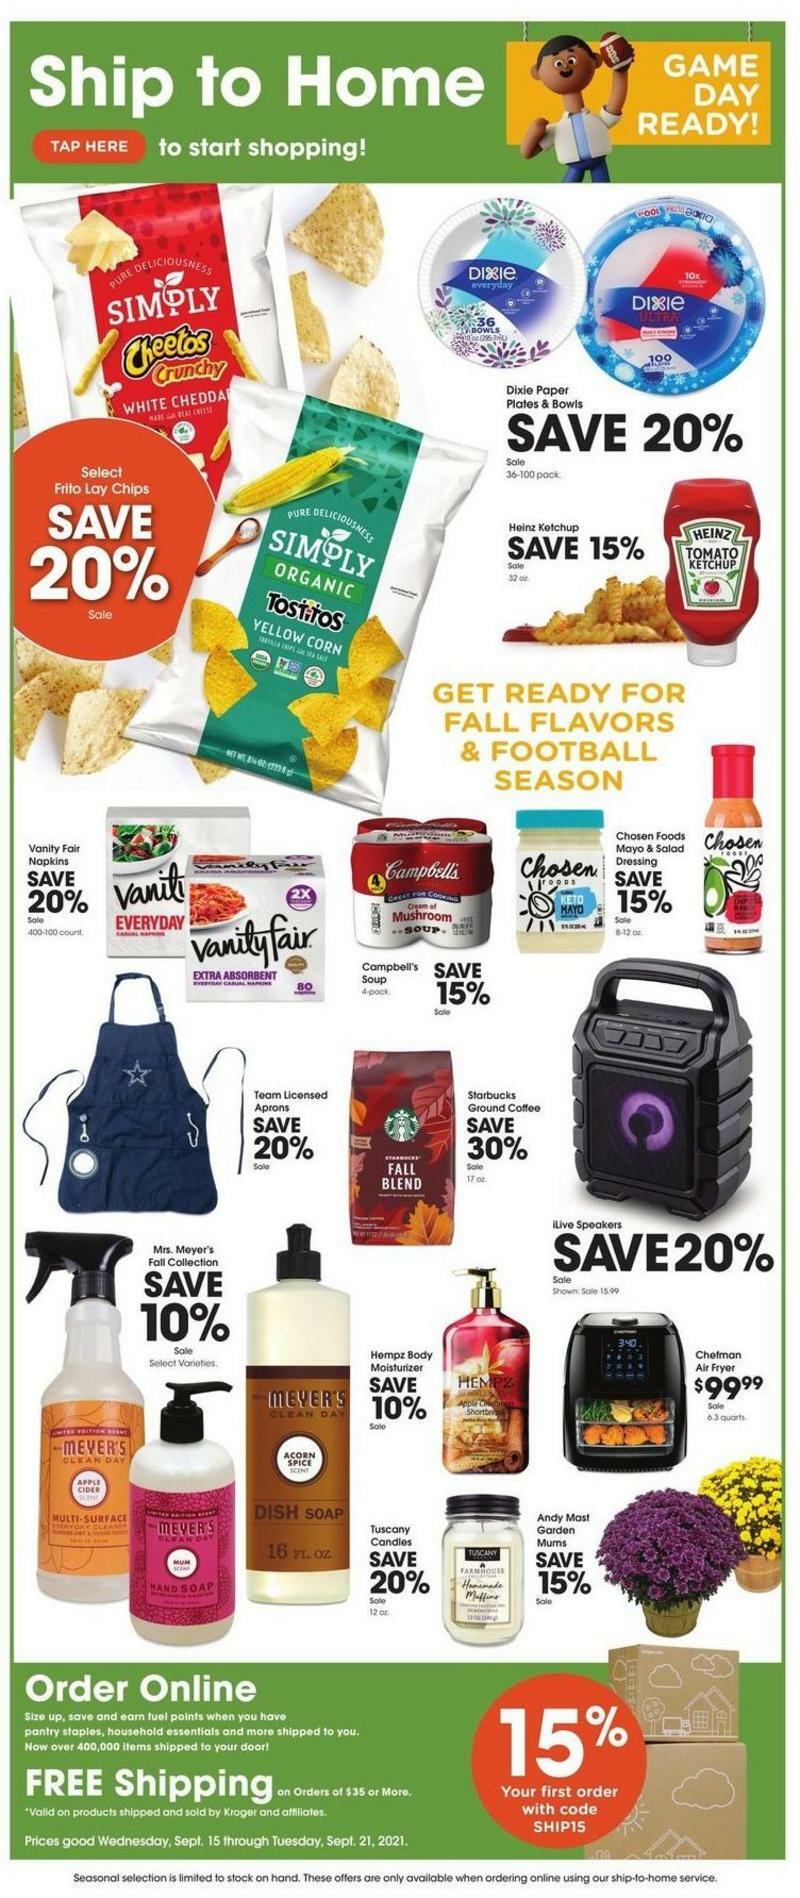 Kroger Weekly Ad from September 15